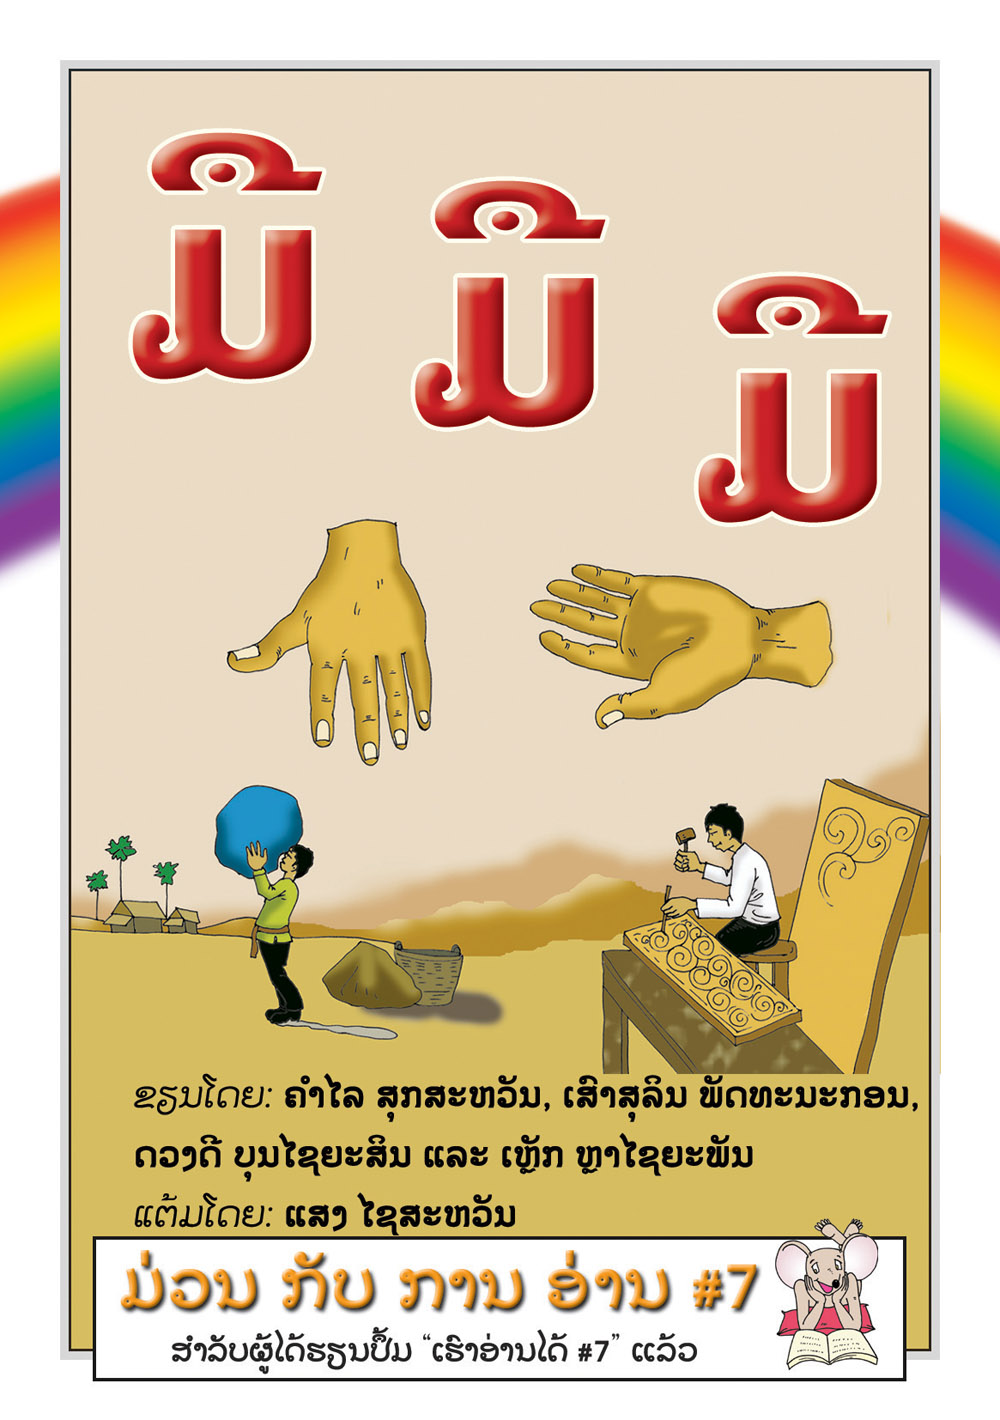 Hands, Hands, Hands large book cover, published in Lao language